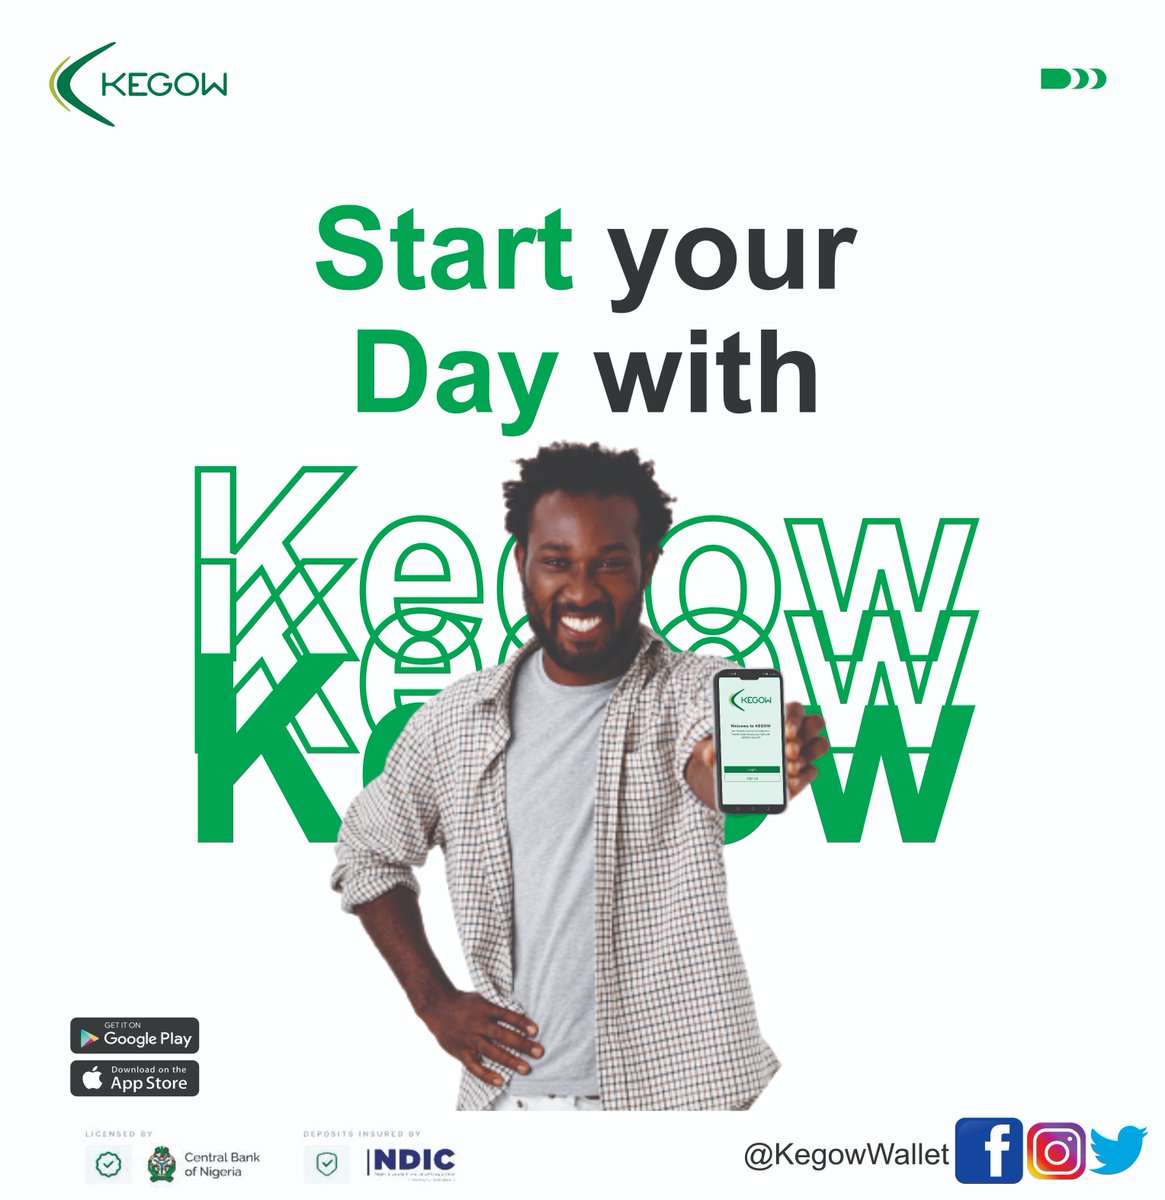 Welcome to a new week!

Begin your day with Kegow as you make easy transfers for all item with just few clicks.

#kegow #epayment #makelifeeasy